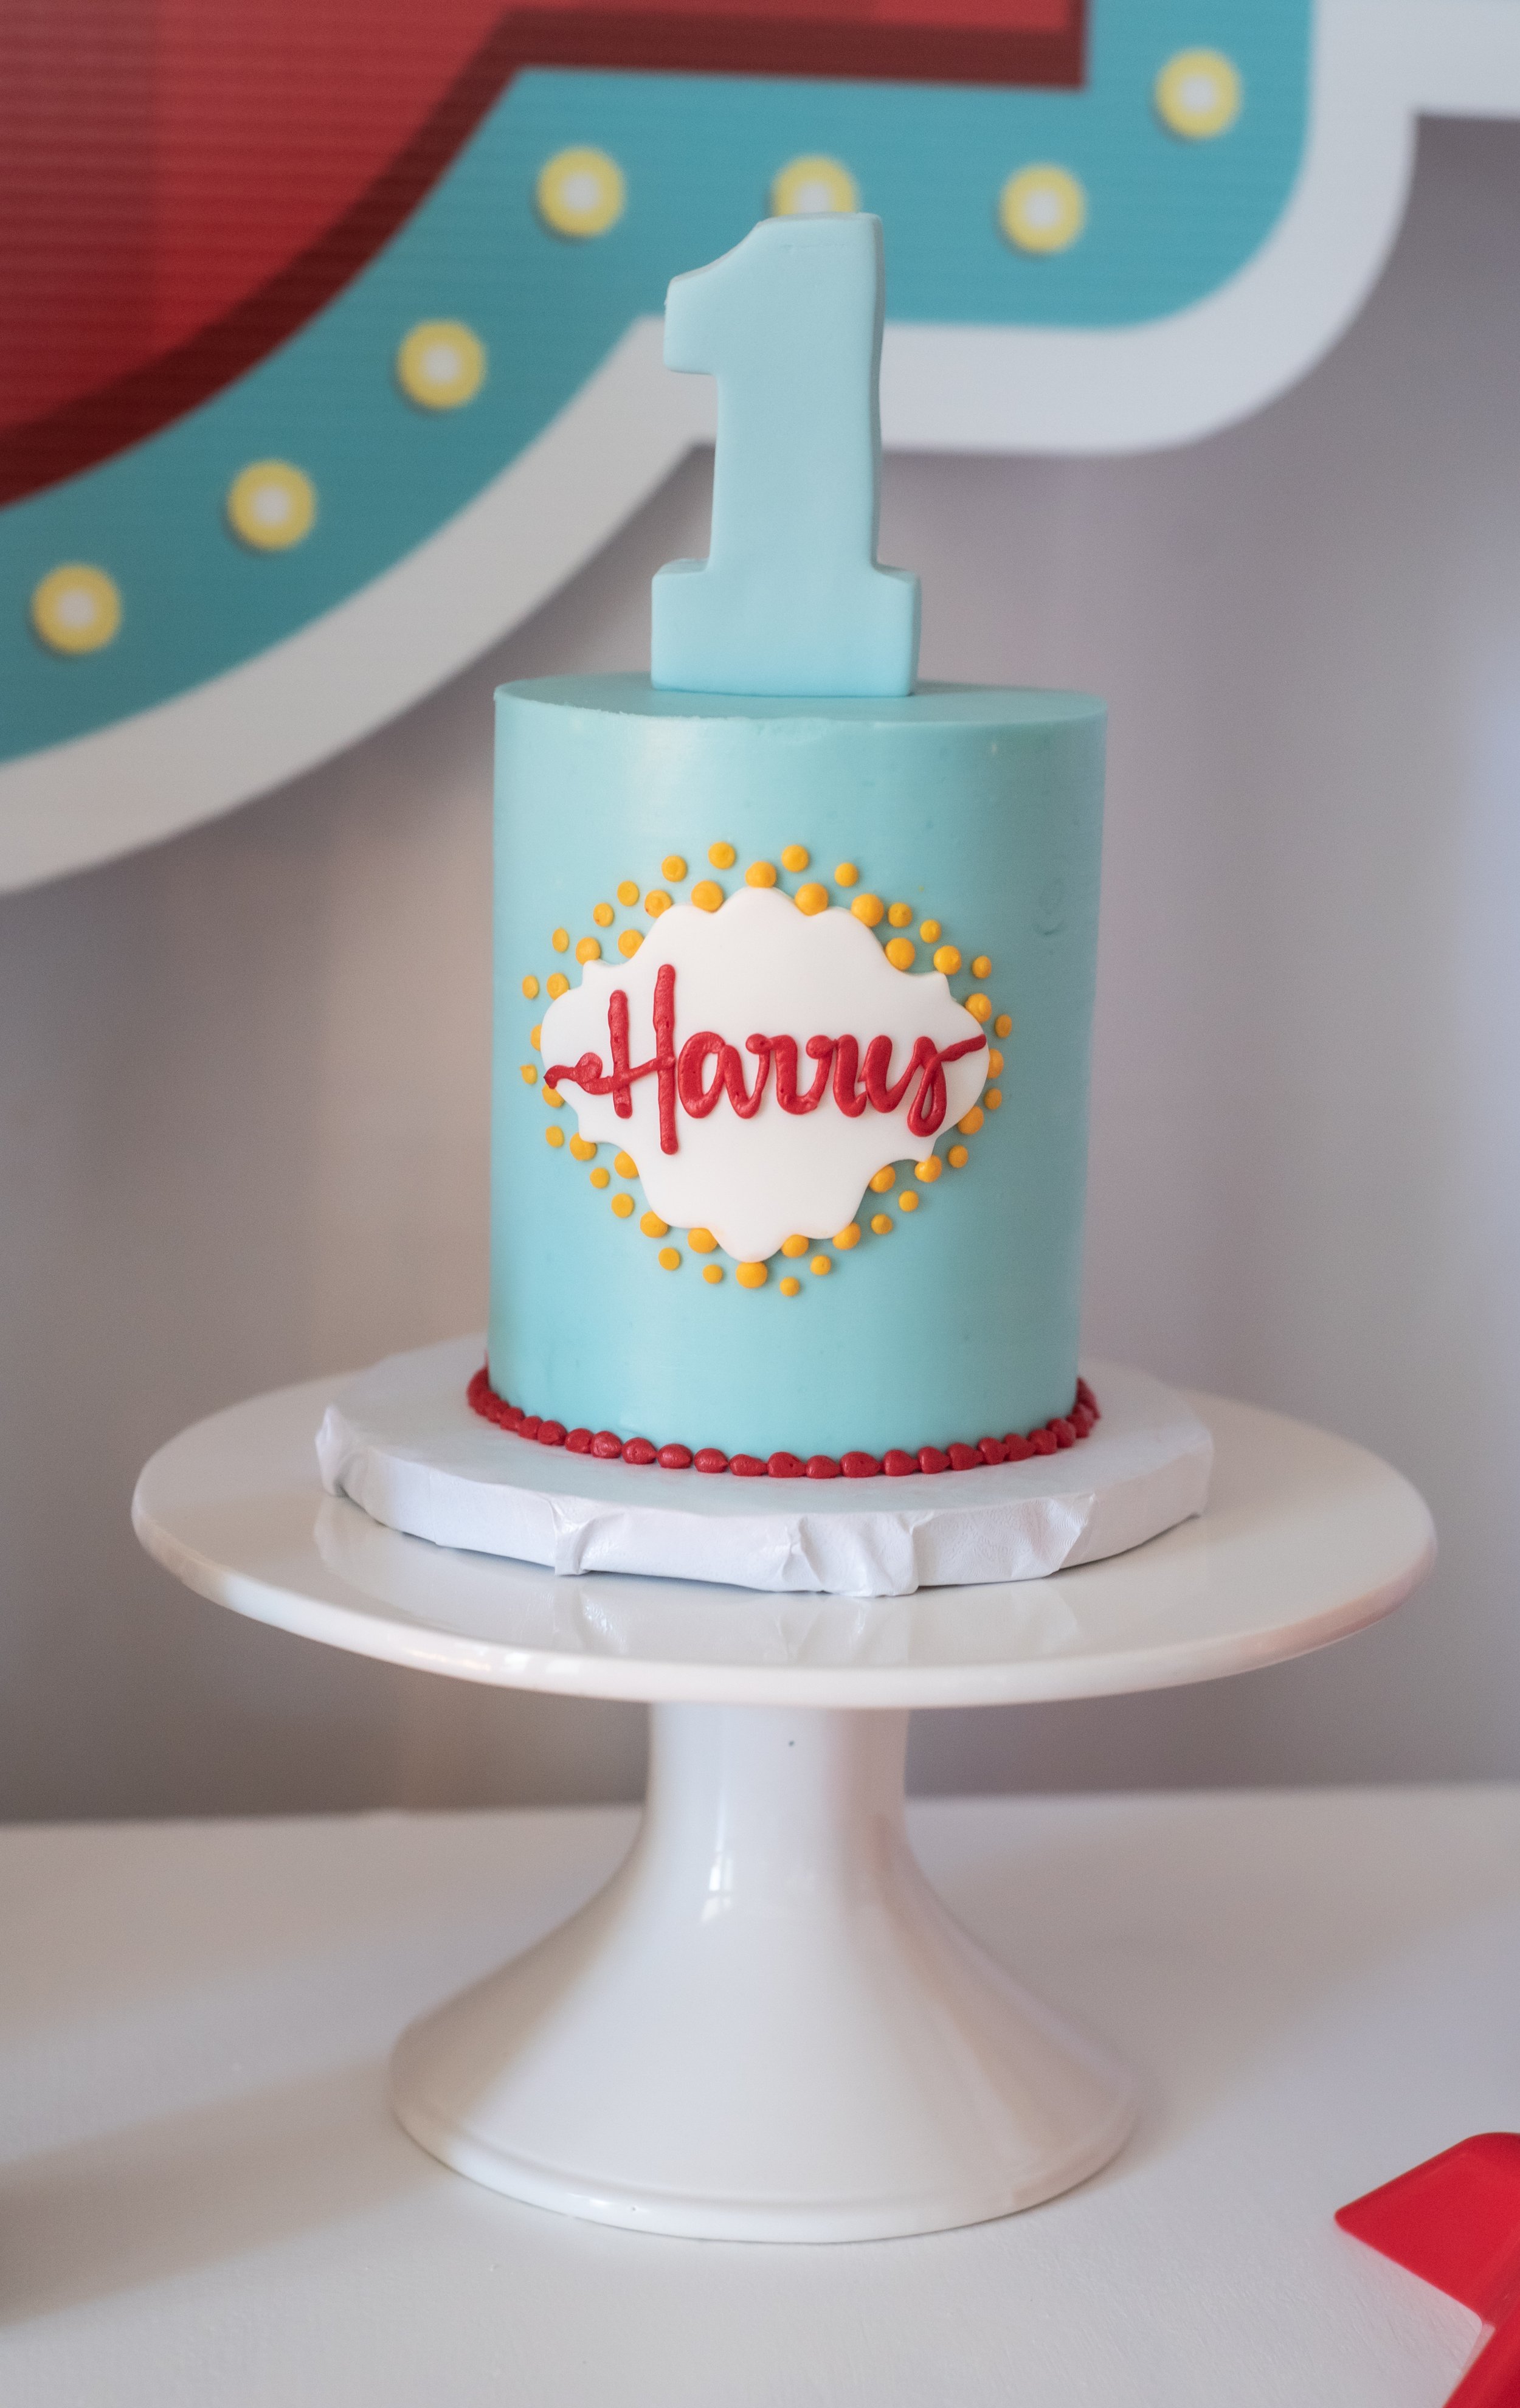 Carnival or circus themed 1st birthday smash cake. Party details at www.minteventdesign.com!